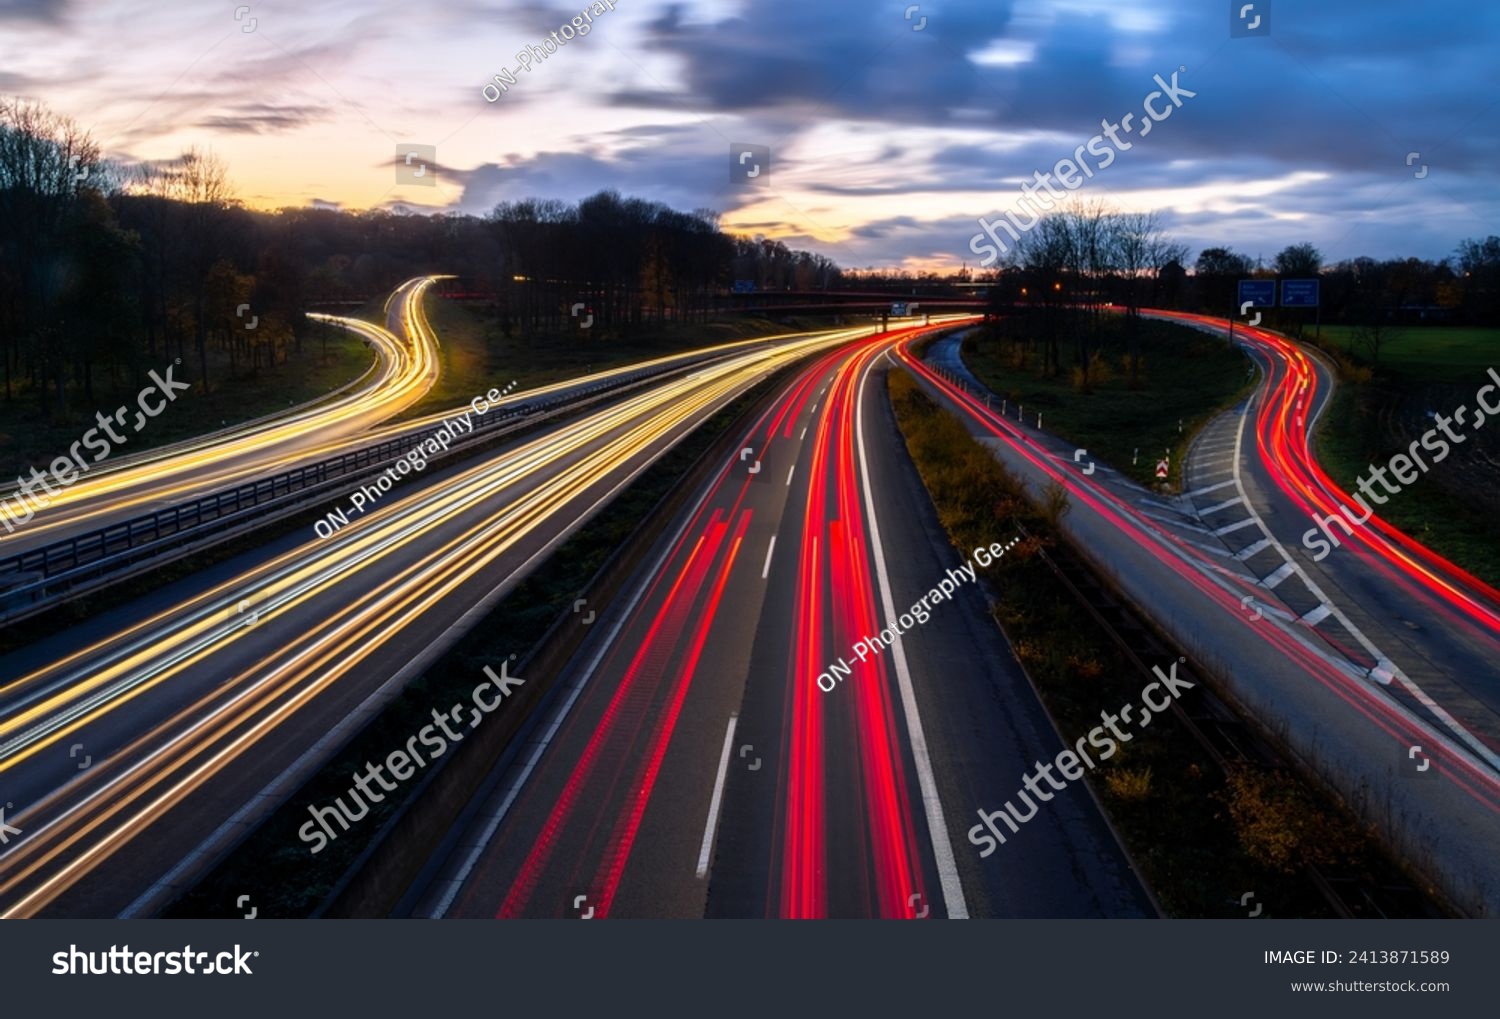 Autobahn crossing (A40 and A3) in Ruhr Basin Germany near Duisburg, Essen and Düsseldorf. Panoramic longtime exposure with red and white lights of passing cars at blue hour twilight after sunset. #2413871589